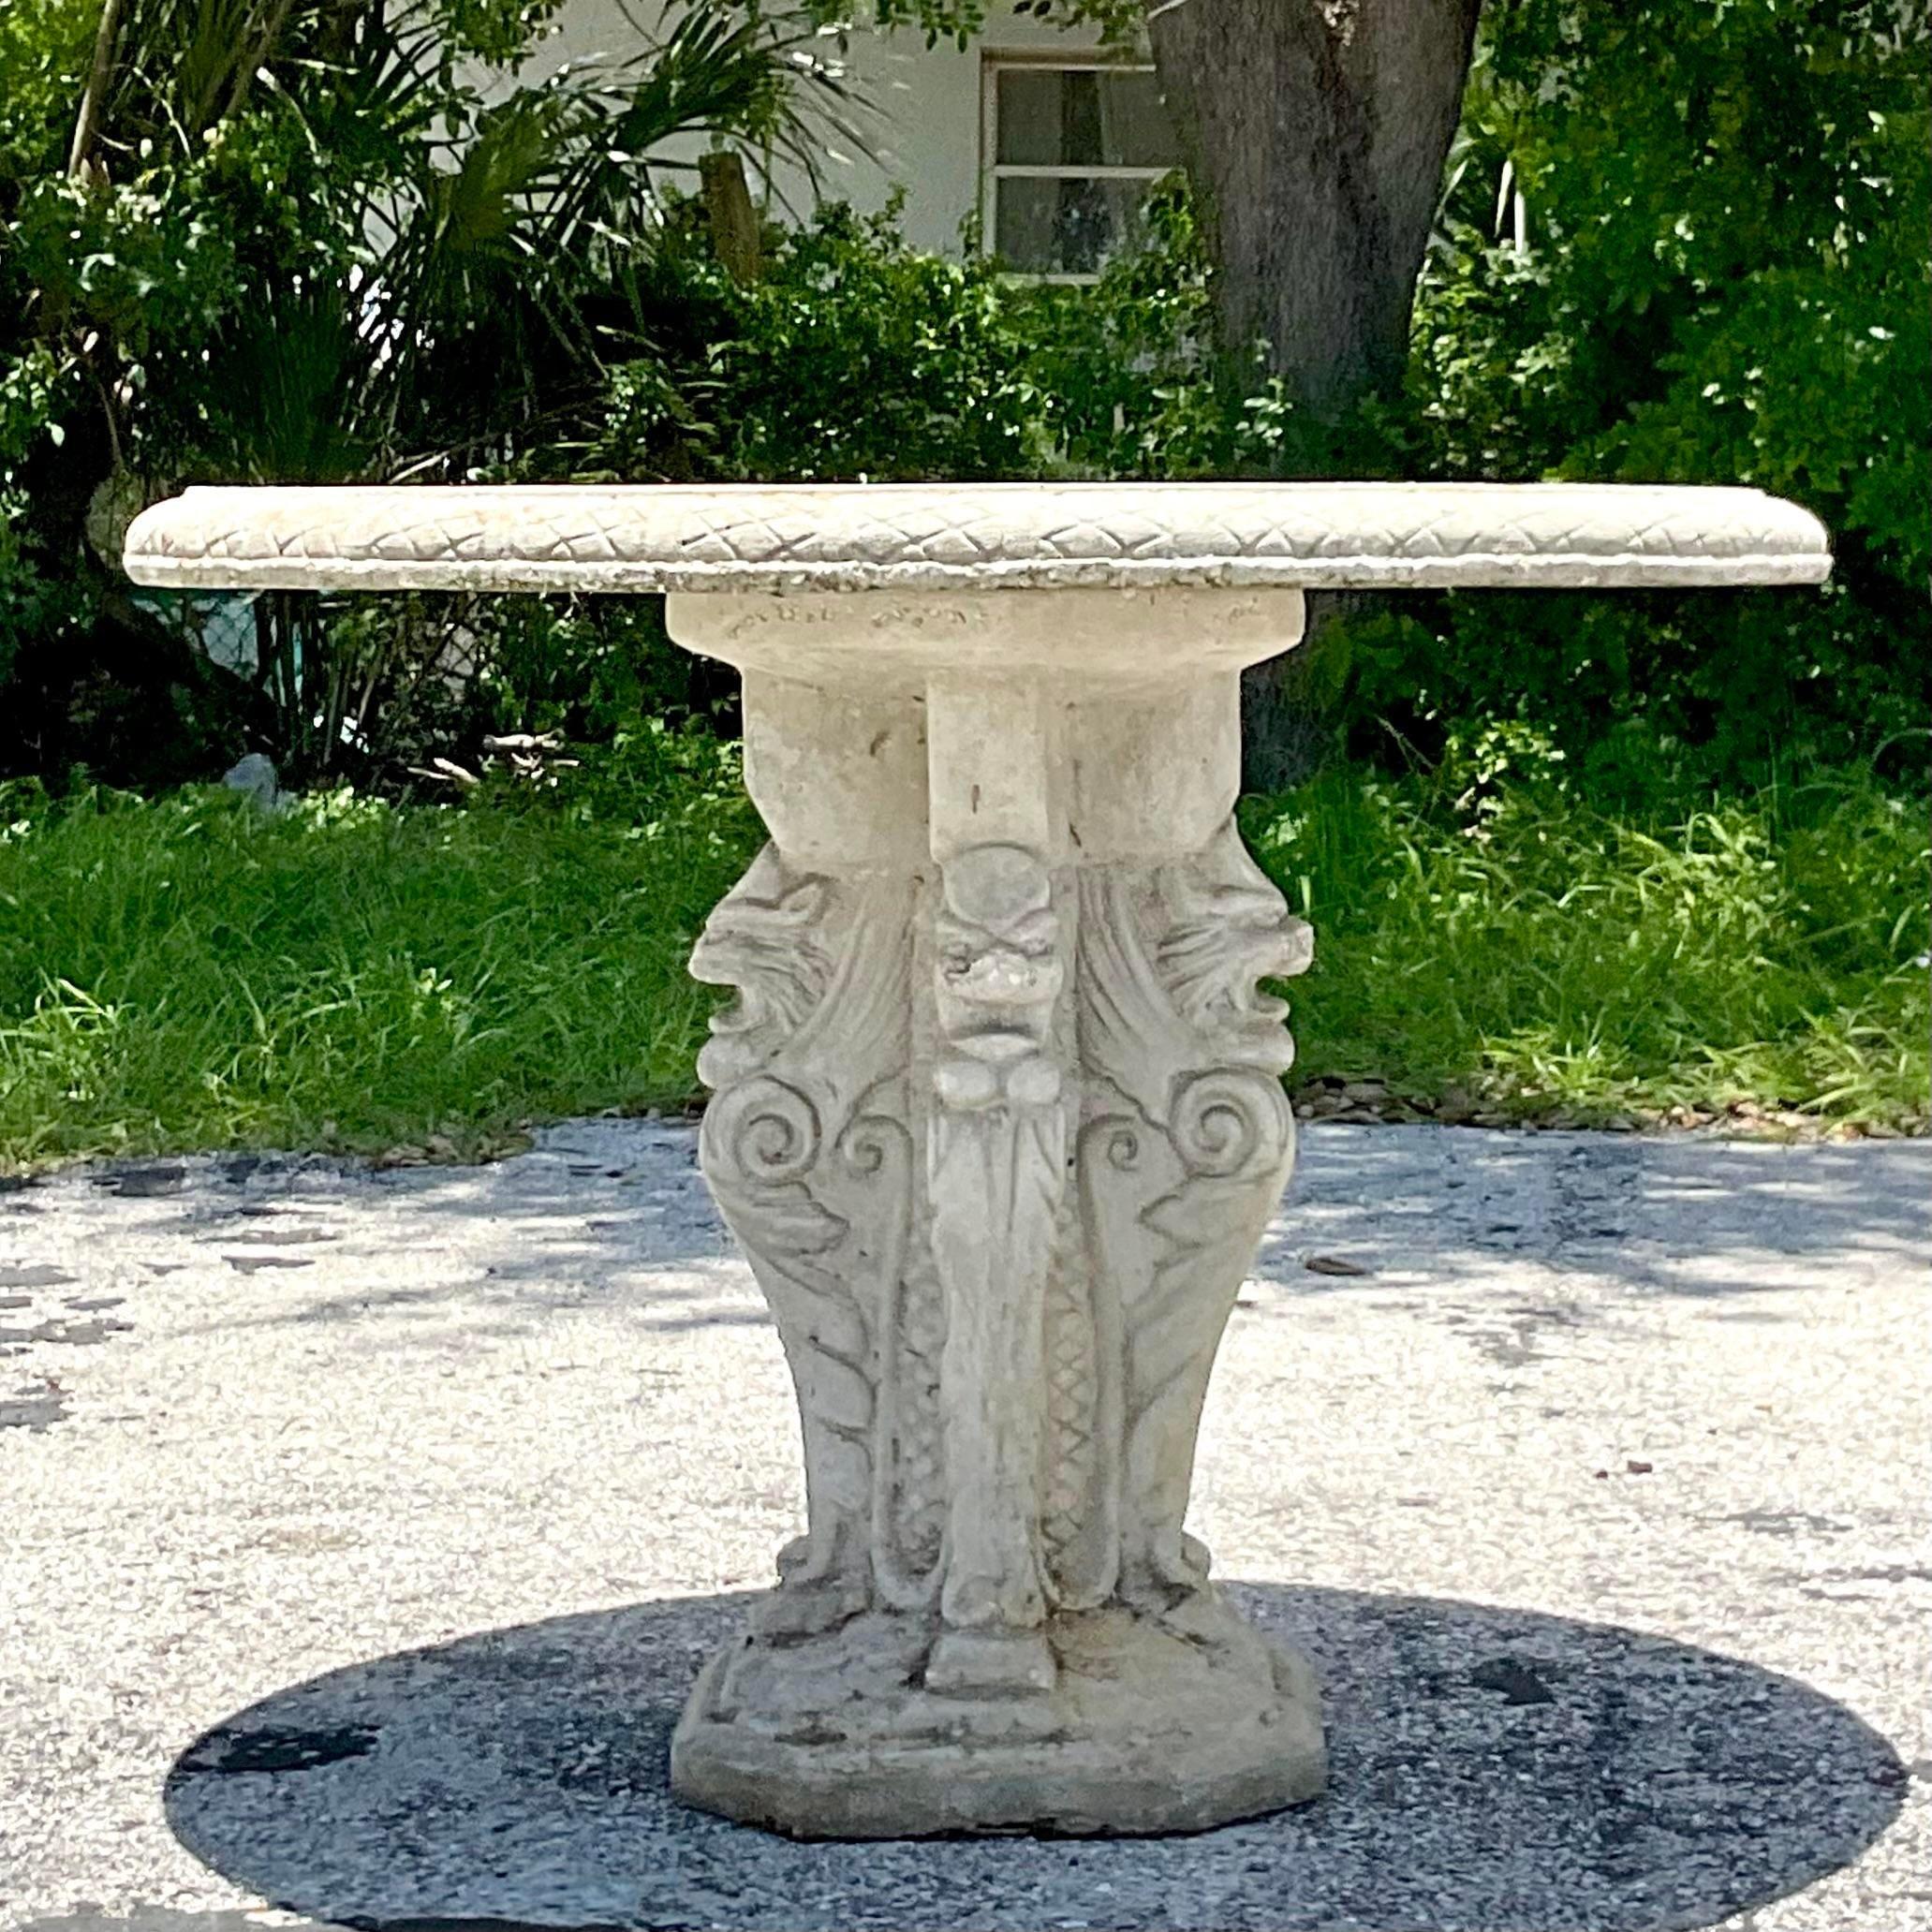 A fantastic vintage Coastal cast concrete outdoor dining table. A chic grotto design with serpent pedestal.